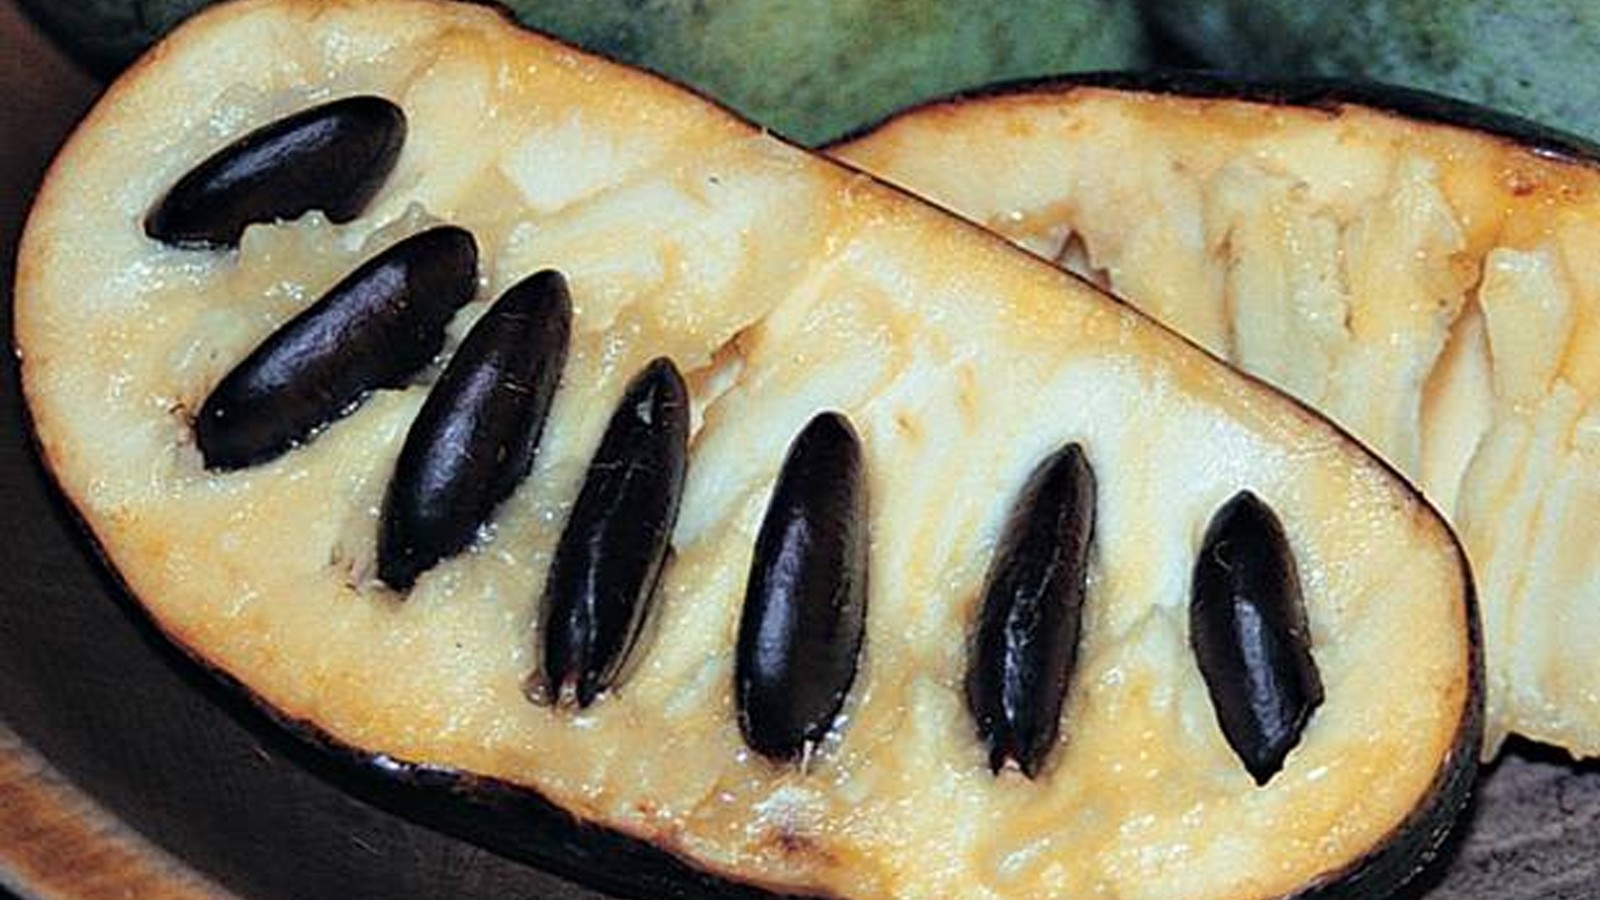 Why Americans Don't Eat Pawpaw - The